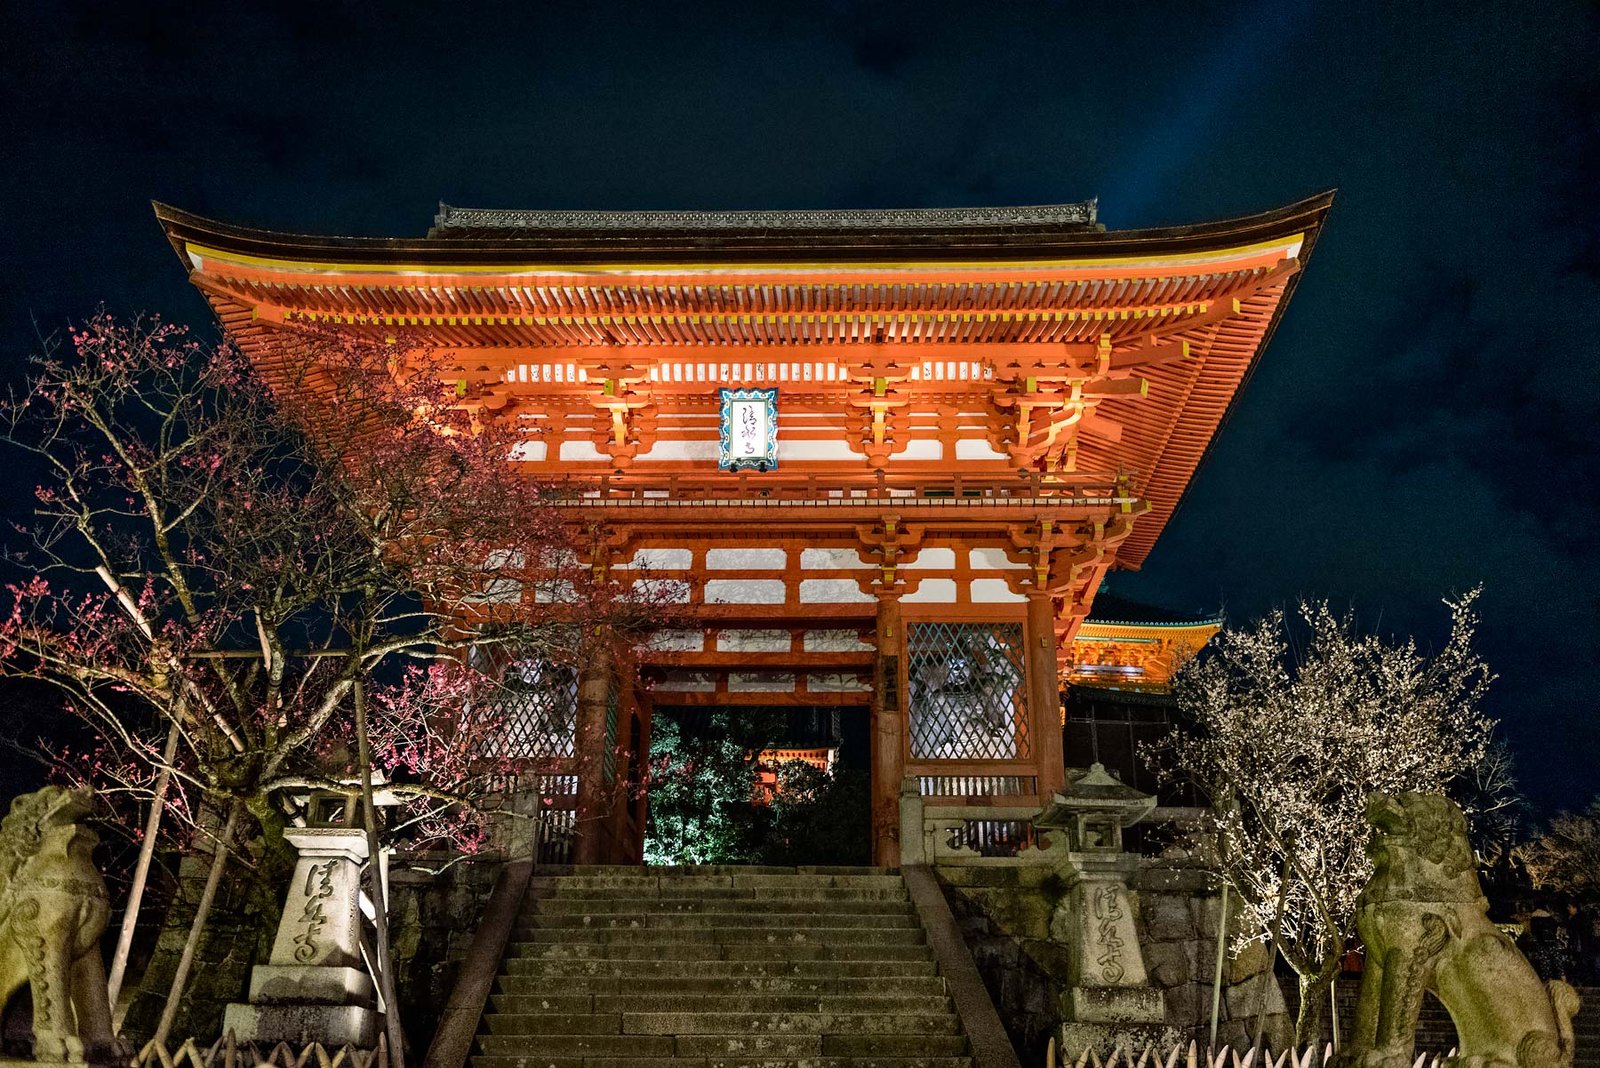 Night Viewing of Kiyomizu-dera Temple in Kyoto. Read more about My 8 Favorite Things to Do and See in Kyoto on Urban Pixxels.